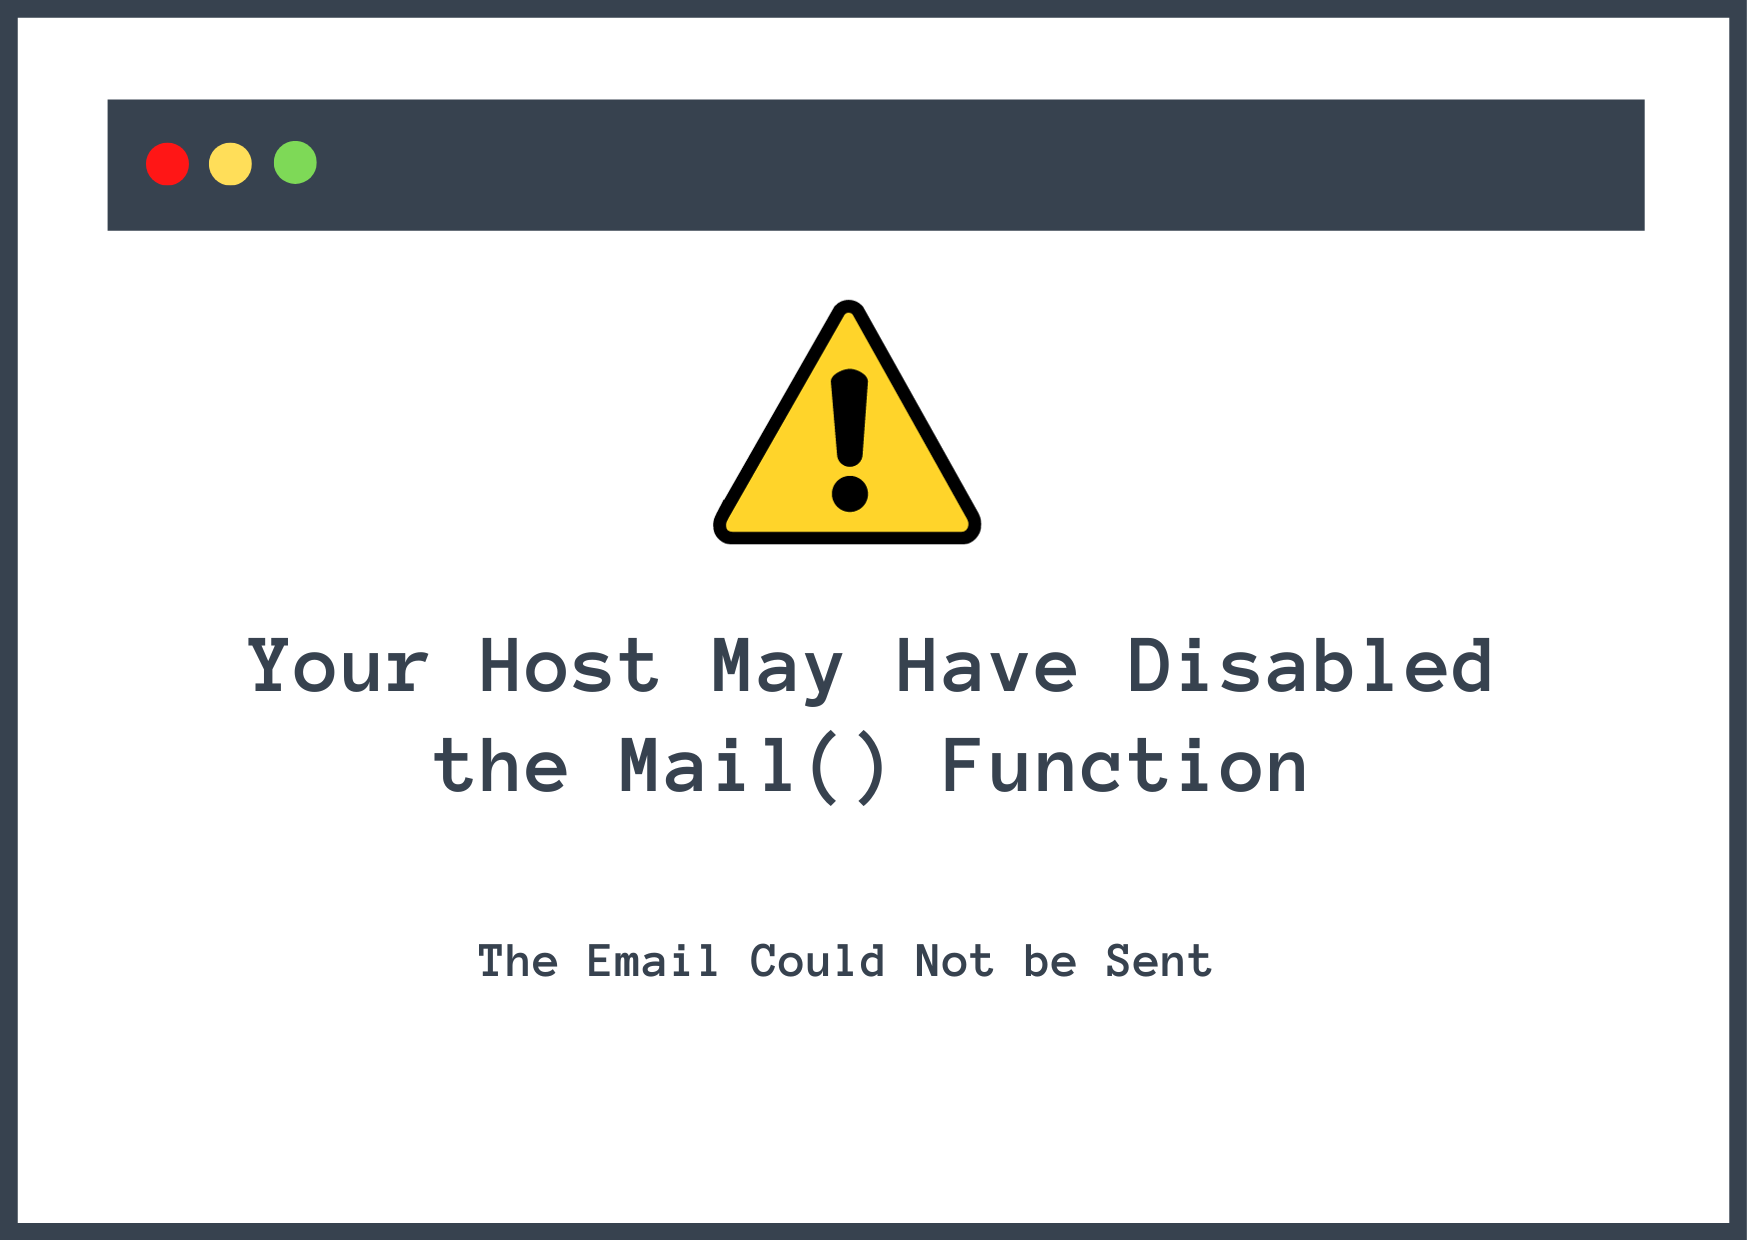 Your Host May Have Disabled the Mail() Function.